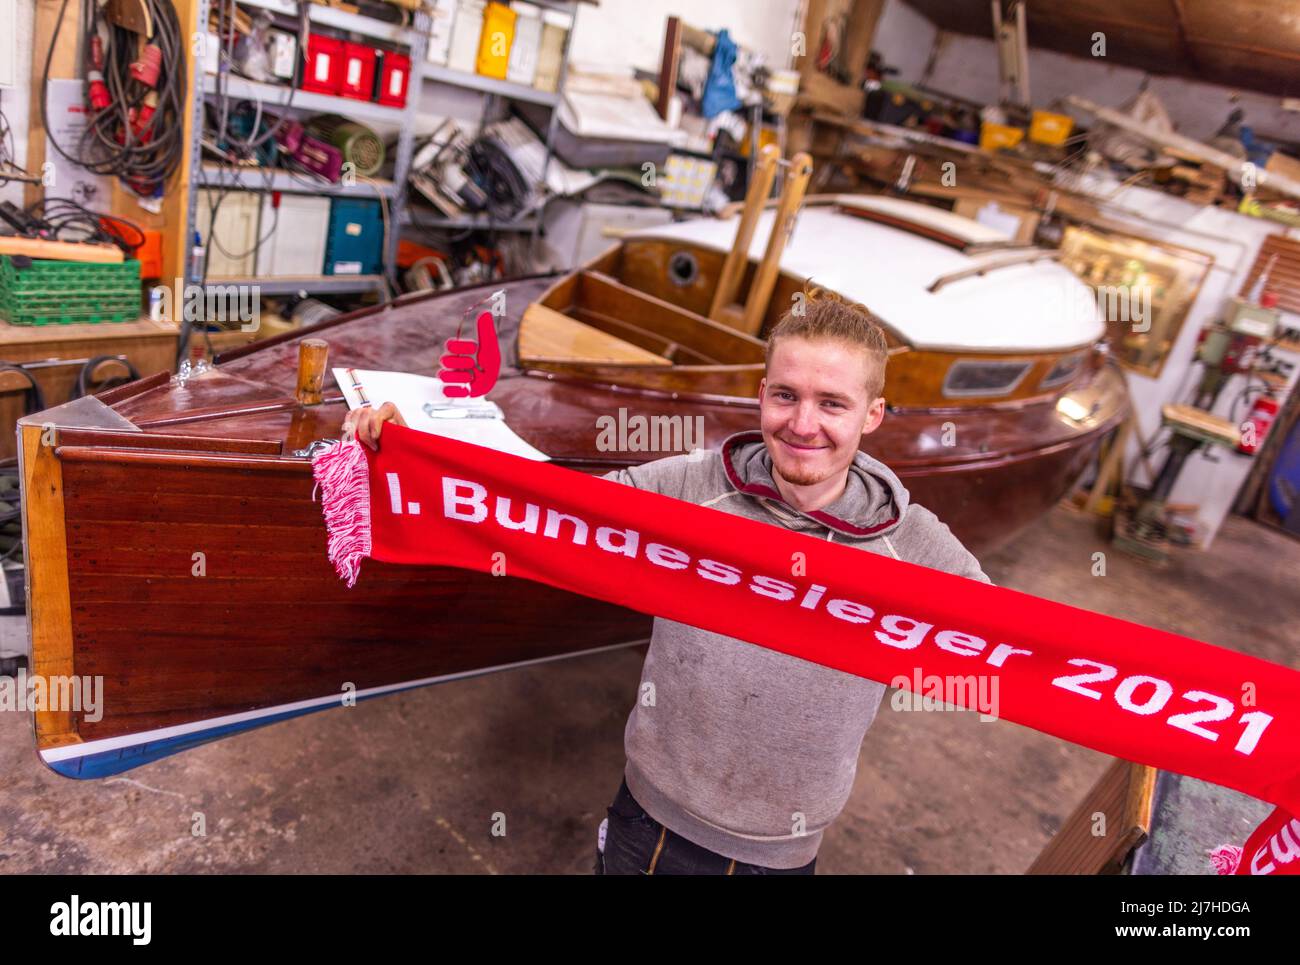 25 January 2022, Mecklenburg-Western Pomerania, Greifswald: Boat builder Florian Woll stands in the workshop of the museum shipyard with the winner's scarf as the current national winner in the performance competition of the German skilled crafts in the craft of boat building. The Chamber of Crafts of Eastern Mecklenburg-Western Pomerania (HWK) had previously presented the certificate and trophy at the Greifswald training company. According to the HWK, 58 companies with the boat and shipbuilding trade are registered in its jurisdiction. A total of 55 apprentices are being trained in the boatbu Stock Photo